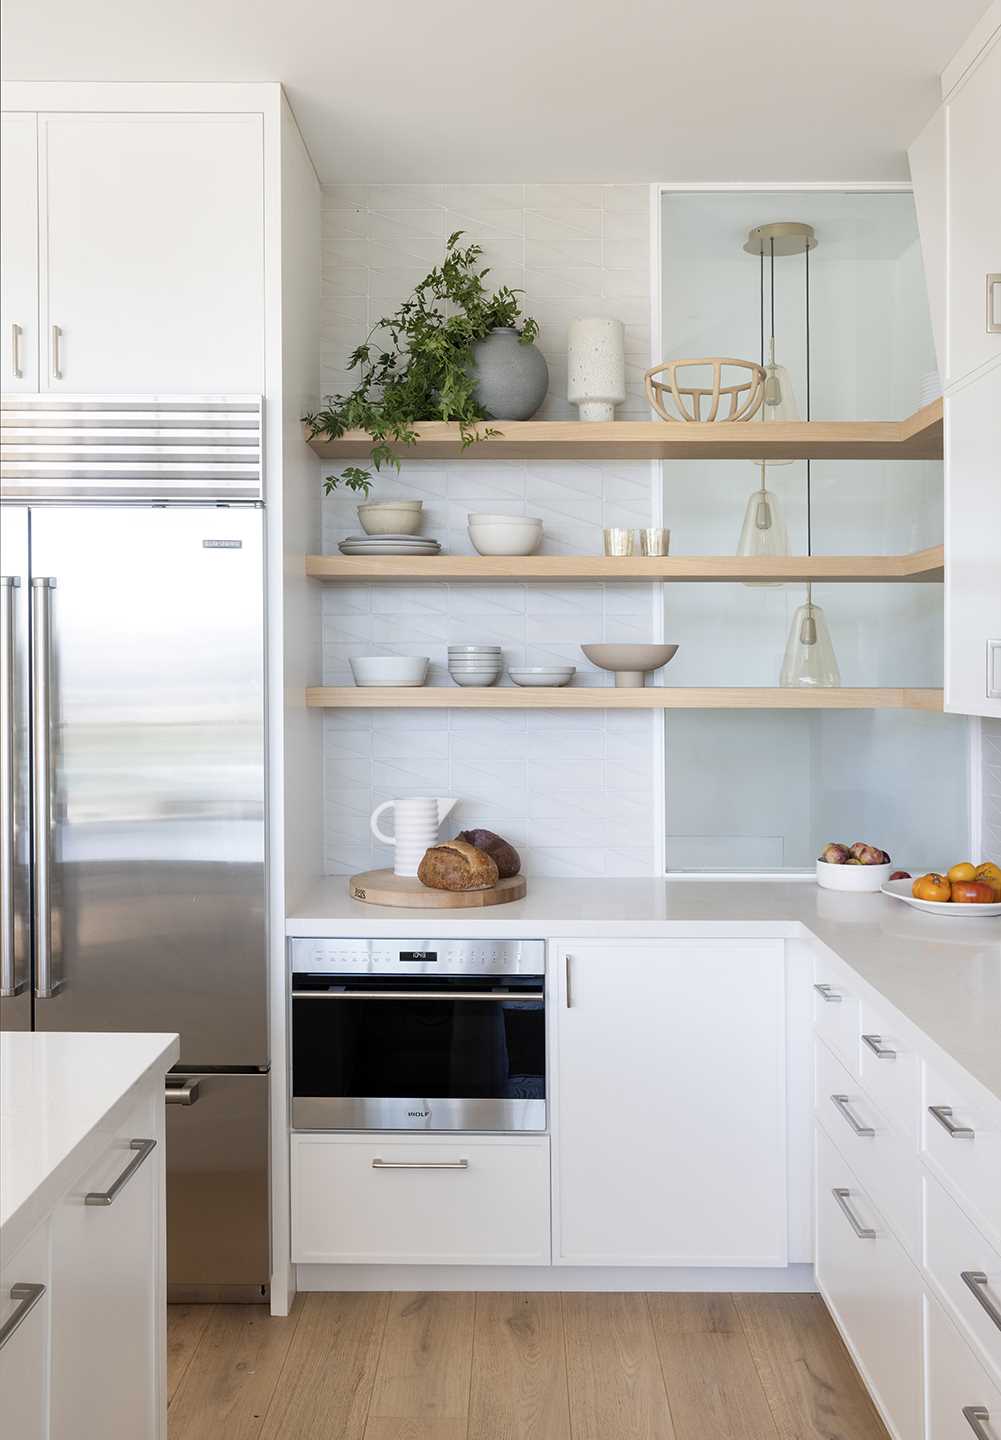 In the kitchen, white cabinets reach to the ceiling, while wood accents provide a natural touch, and a kitchen island includes a wine fridge and a place for seating. A window behind some shelves provides a glimpse of lights in the stairwell.